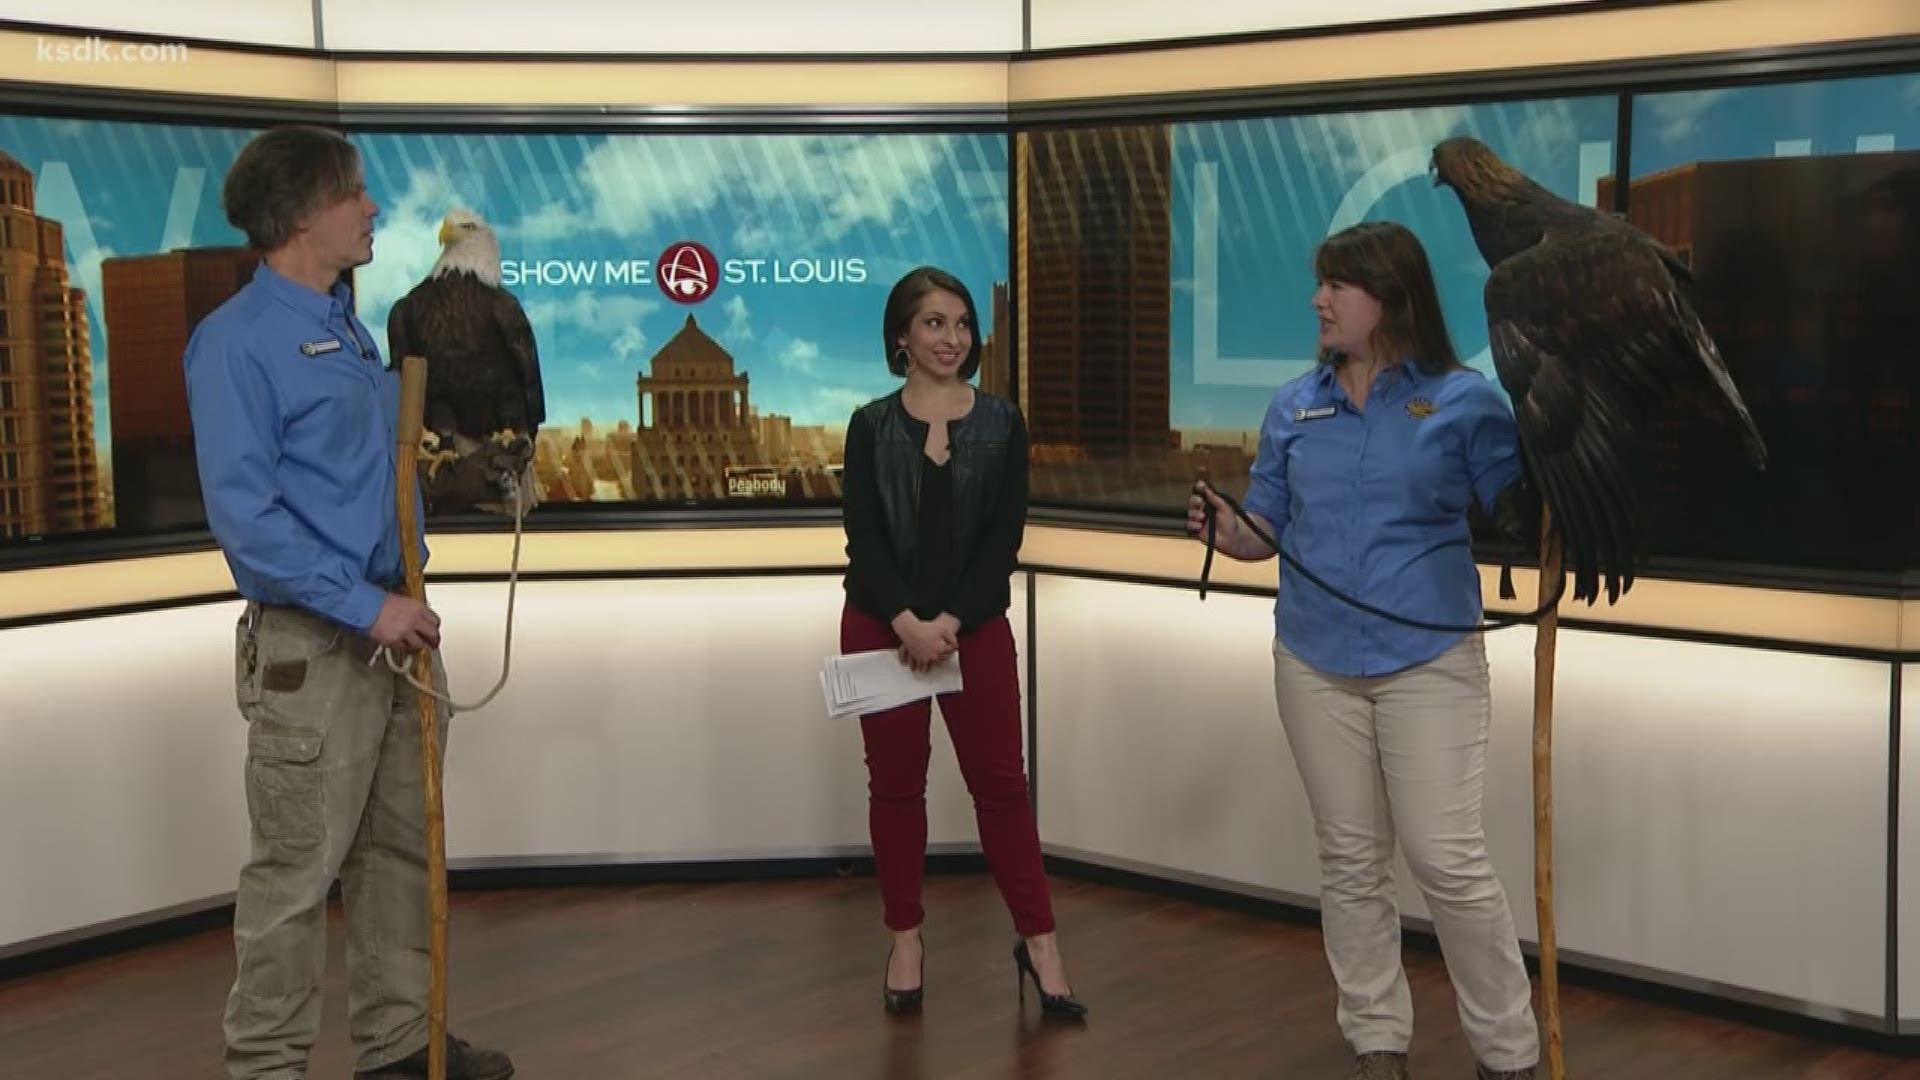 It’s not every day we have two eagles in the studio.